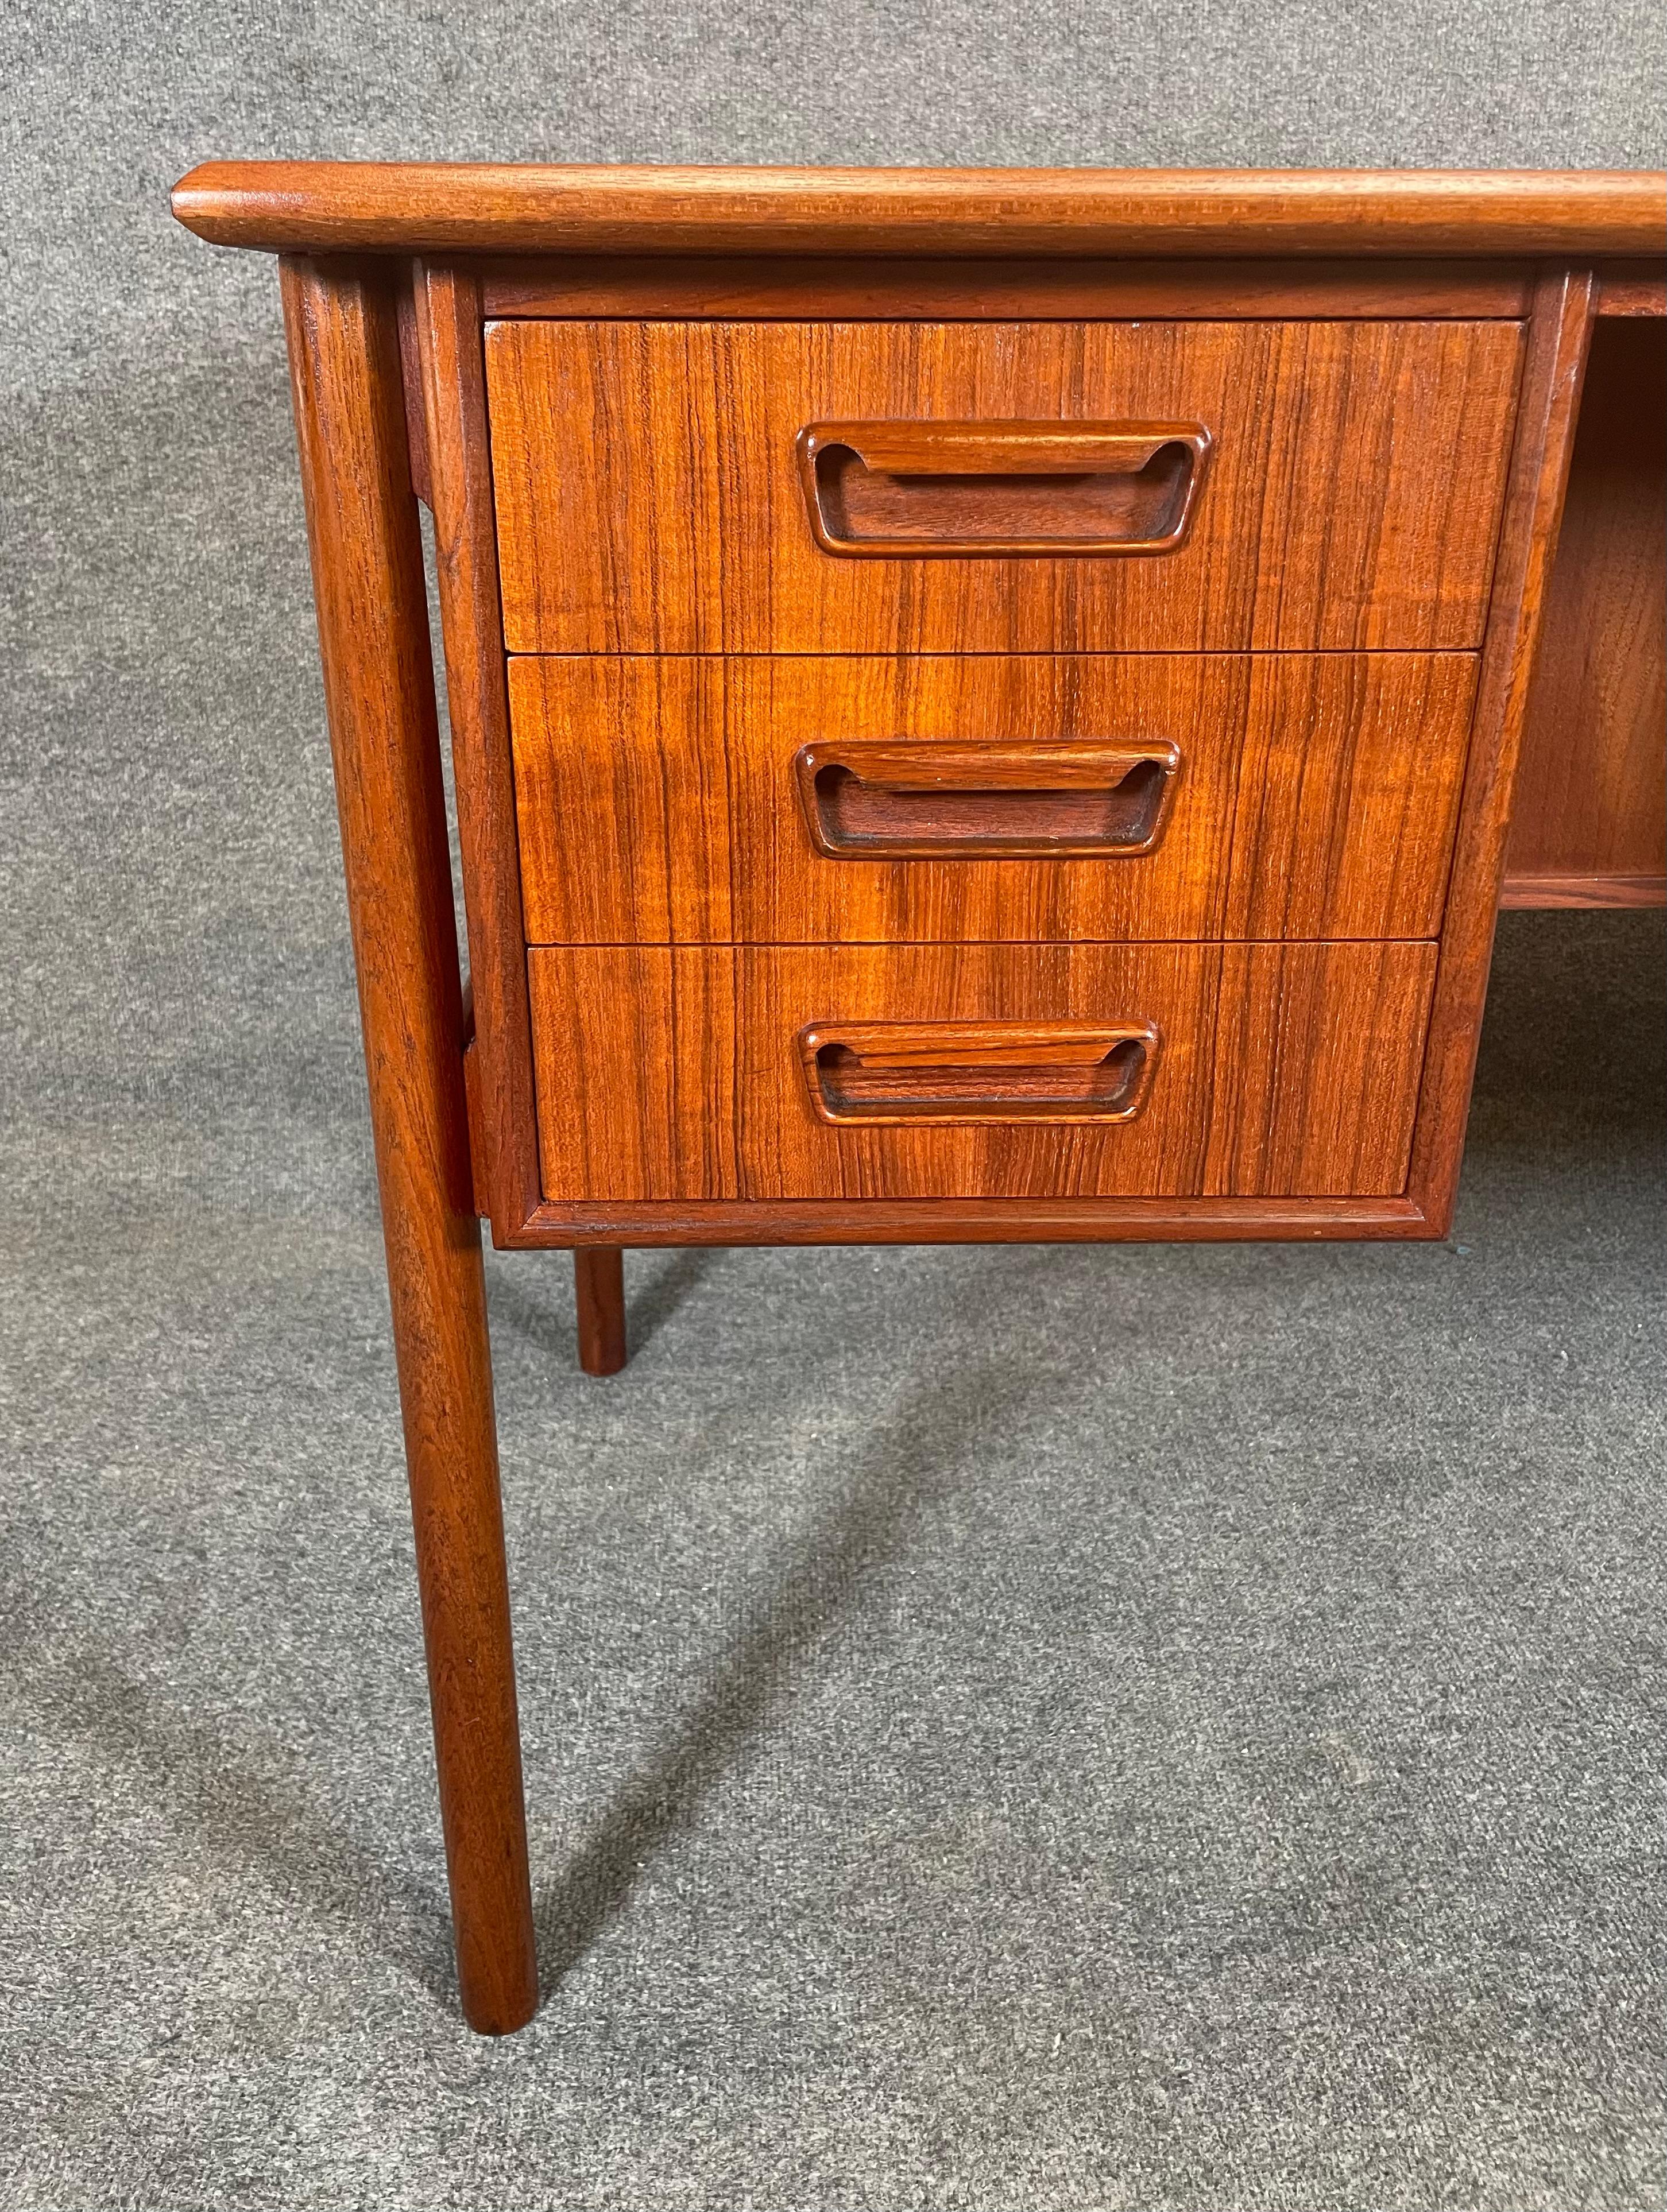 Here is a beautiful Scandinavian modern writing desk in teak manufactured by Gunaar Tibergaard in Denmark in the 1960's.
This lovely desk, recently imported from Europe to California before its refinishing, features a vibrant wood grain, two banks